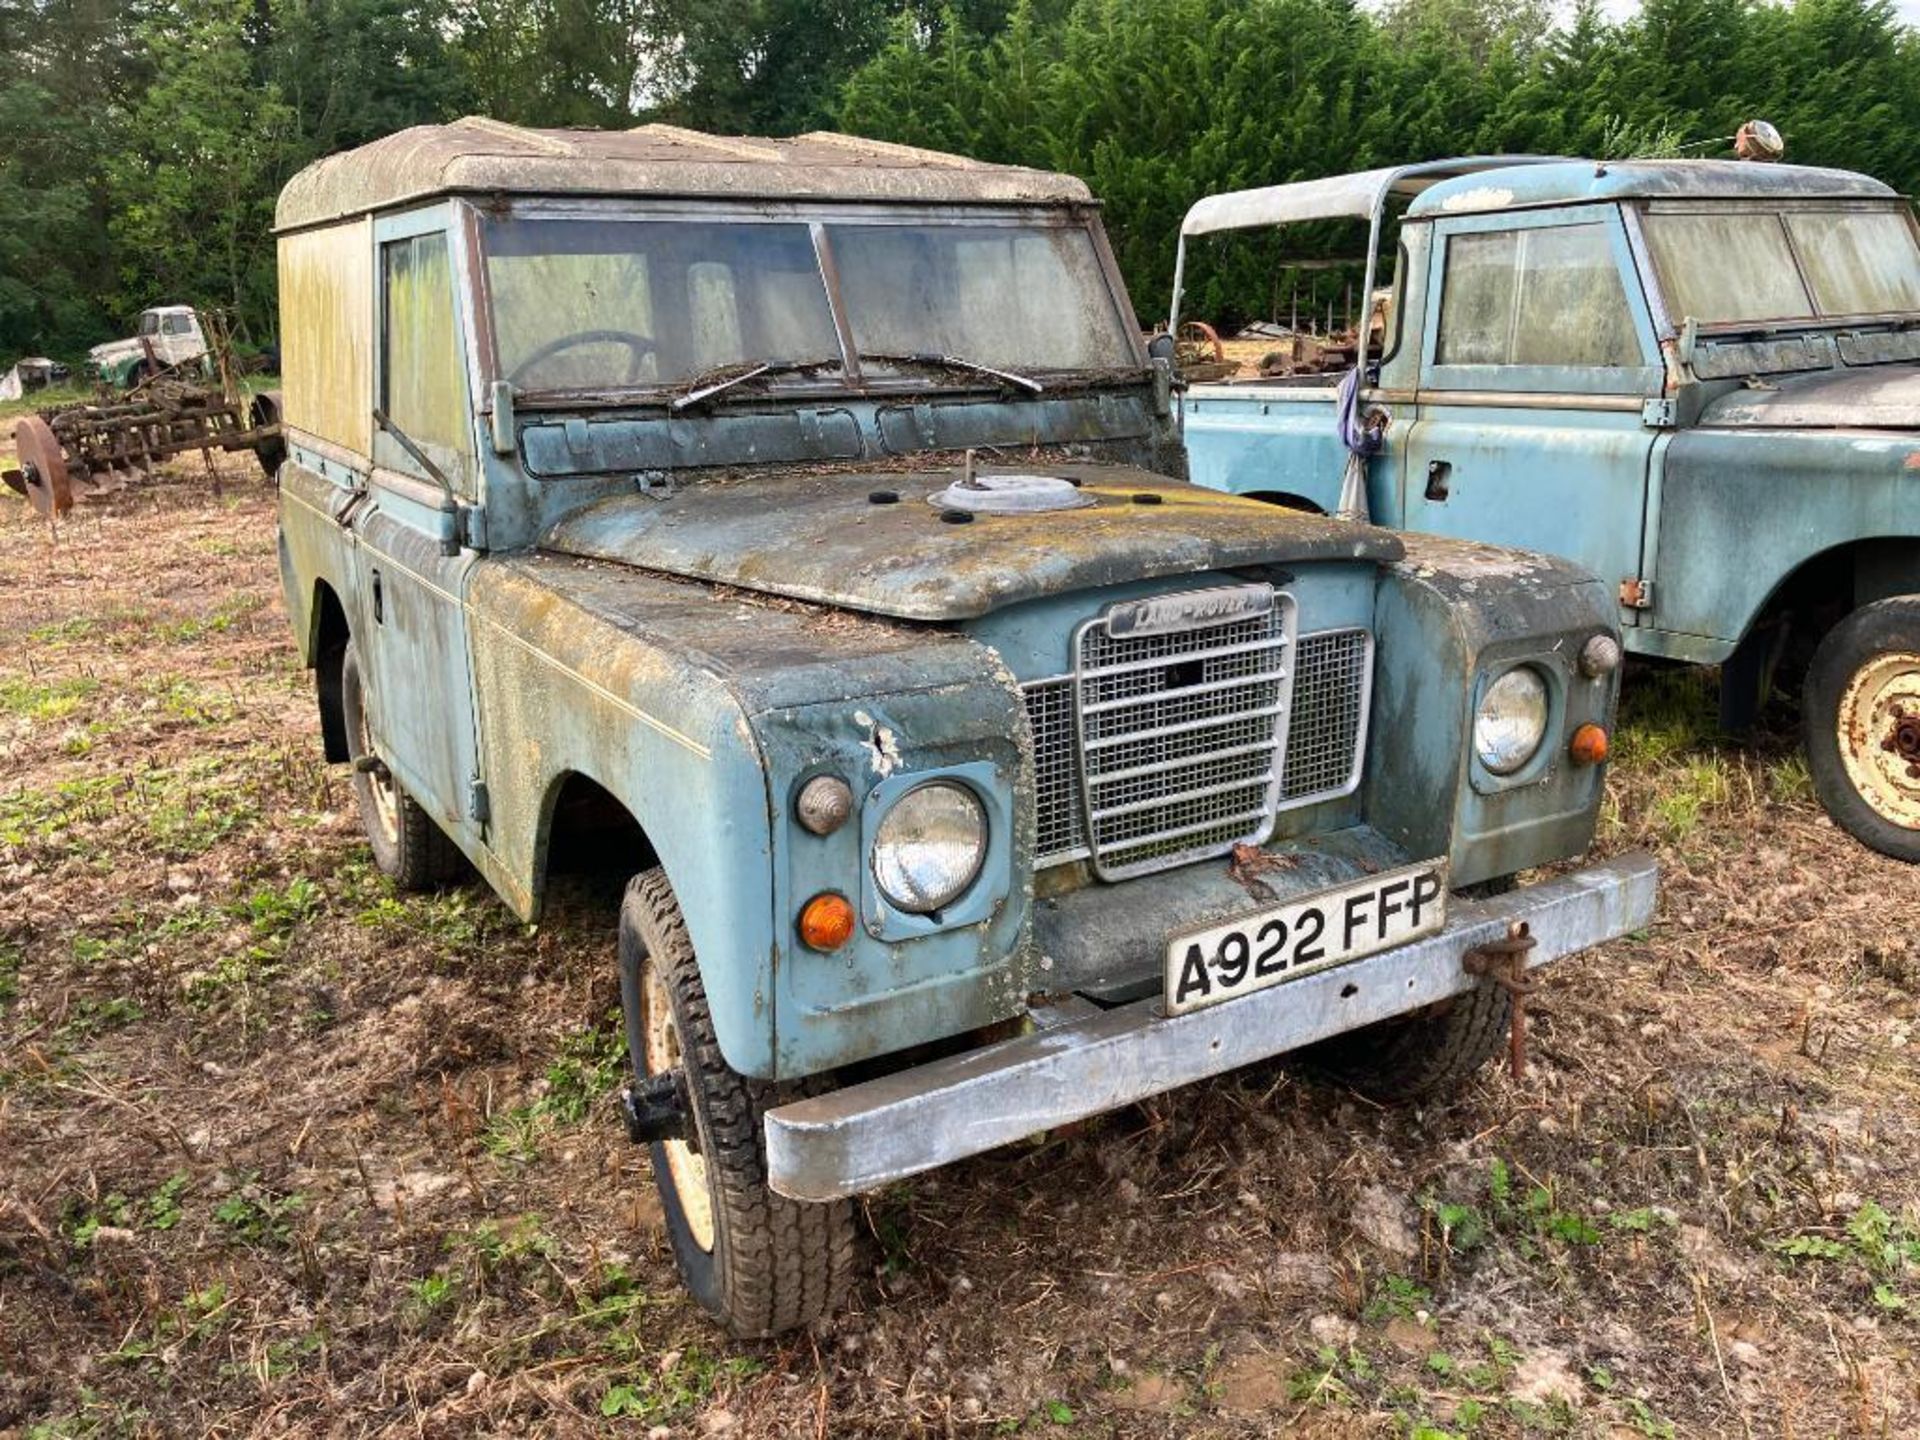 1984 Land Rover Series 3 diesel 4wd manual, blue on 205R16 wheels and tyres. Reg No: A922 FFP. Milea - Image 2 of 6